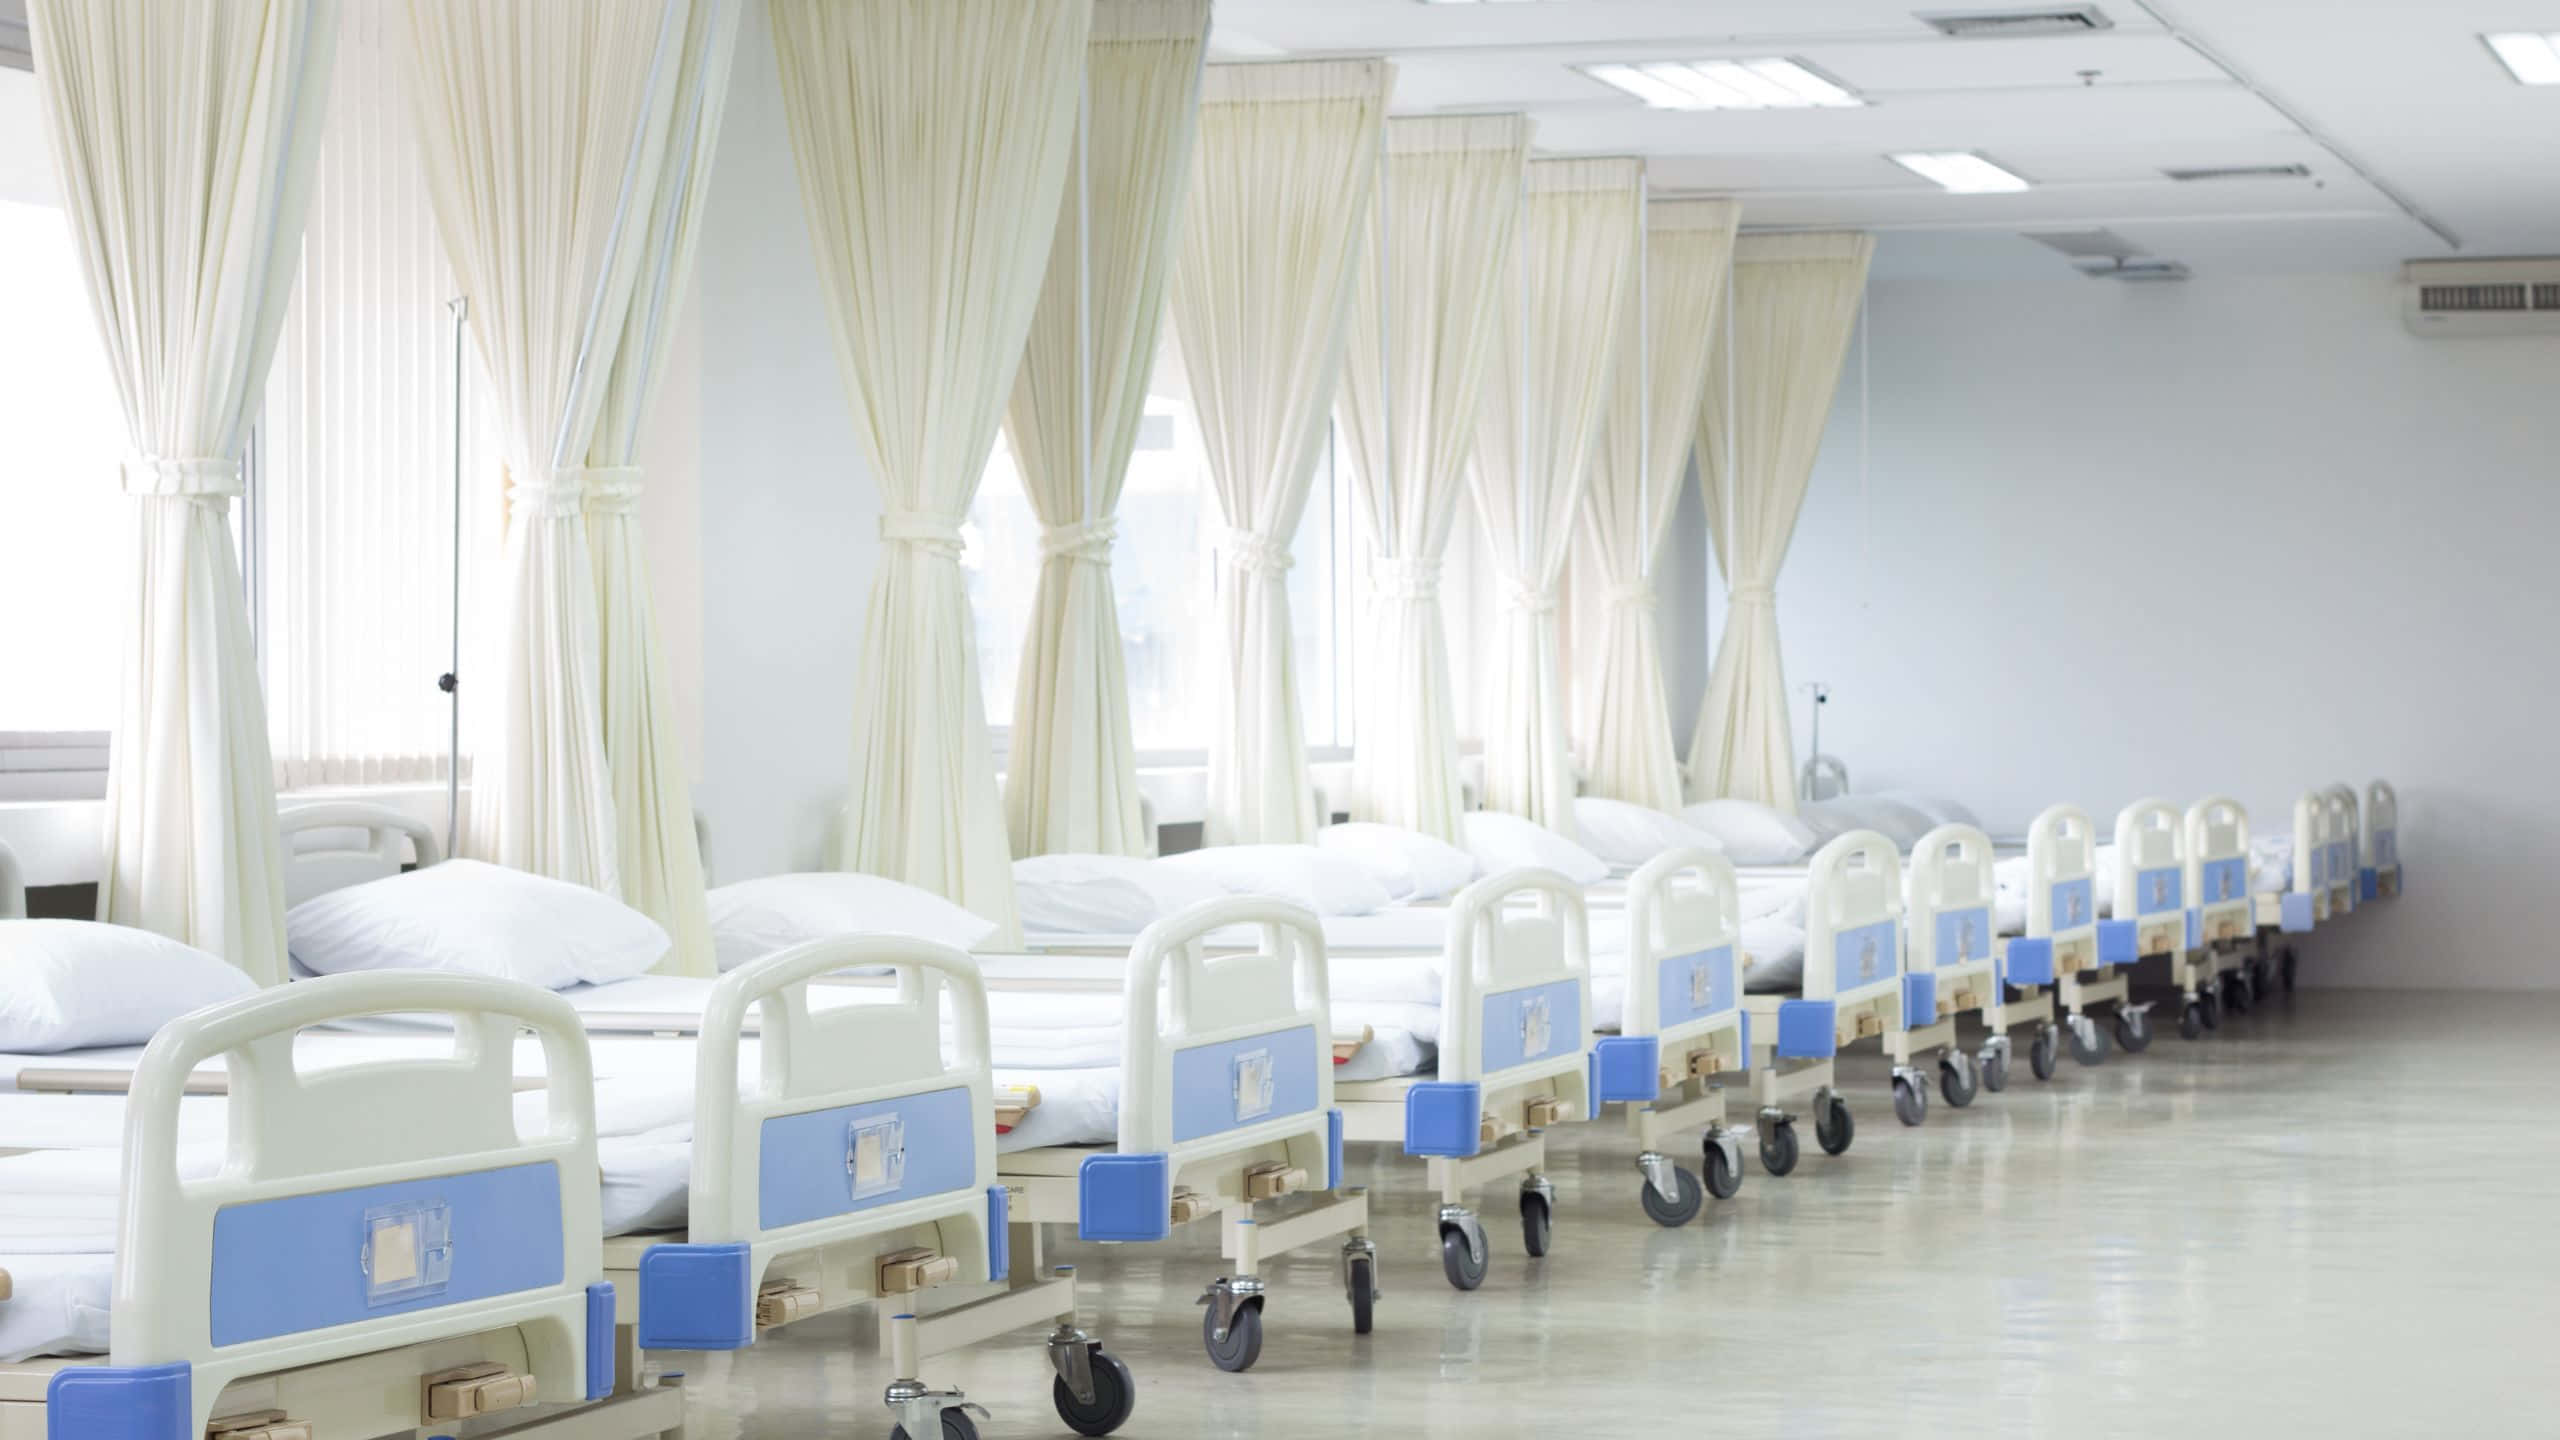 A Row Of Hospital Beds In A Hospital Room